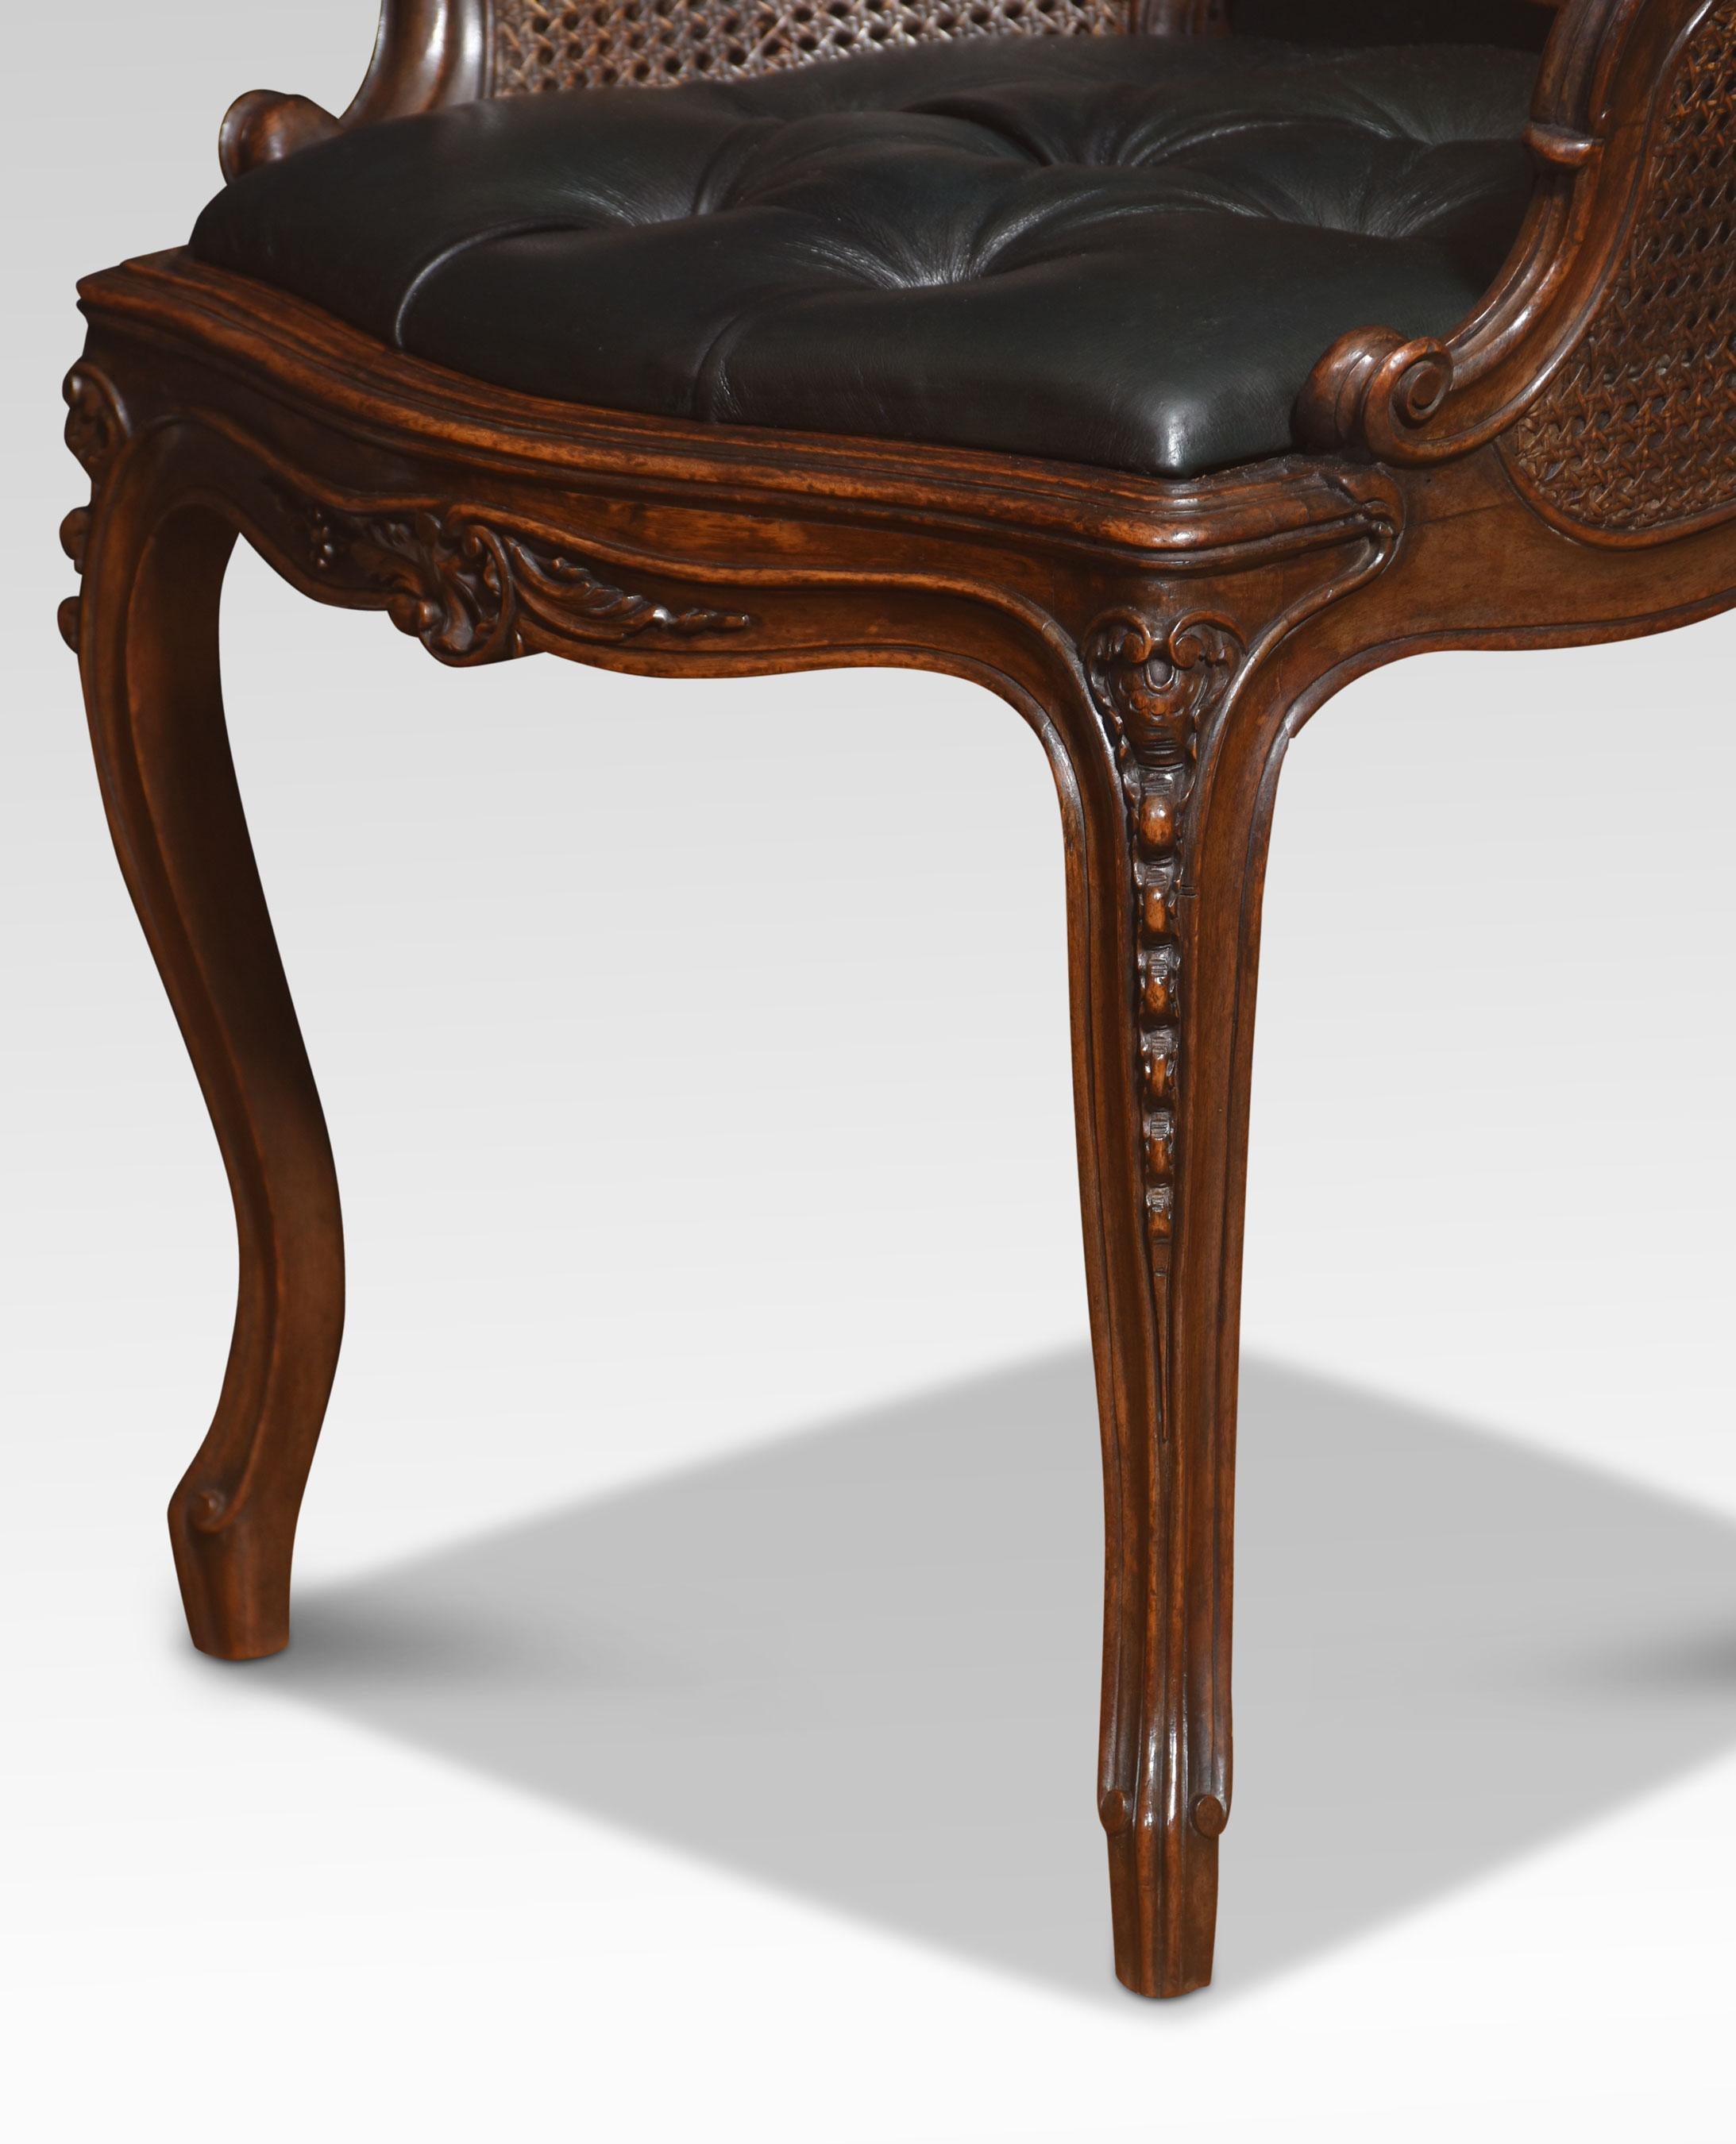 Pair of French Louis XV side chairs, the carved rail in the typical manner of the period, with detailed leaf motifs. to the canework back and deep buttoned leather seat. All raised up on four carved tapering cabriole legs
Dimensions
Height 34 Inches